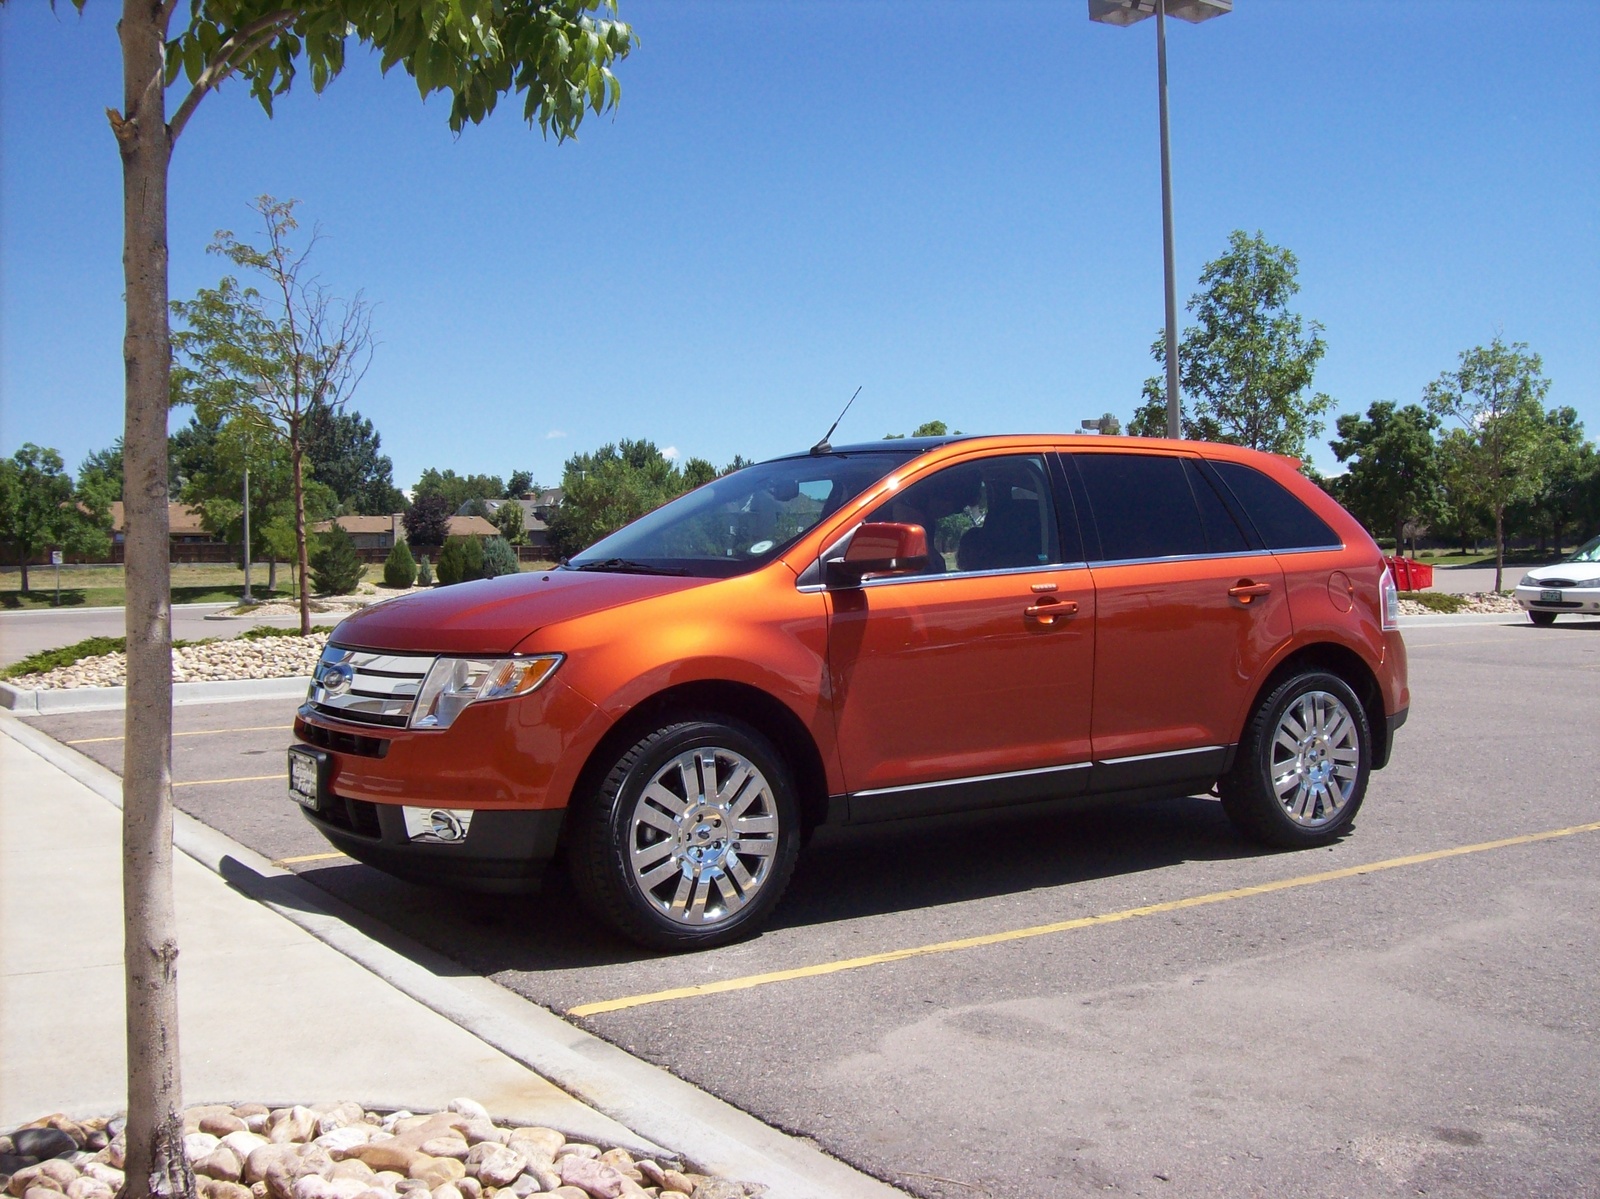 2008 Ford edge reliability ratings #10